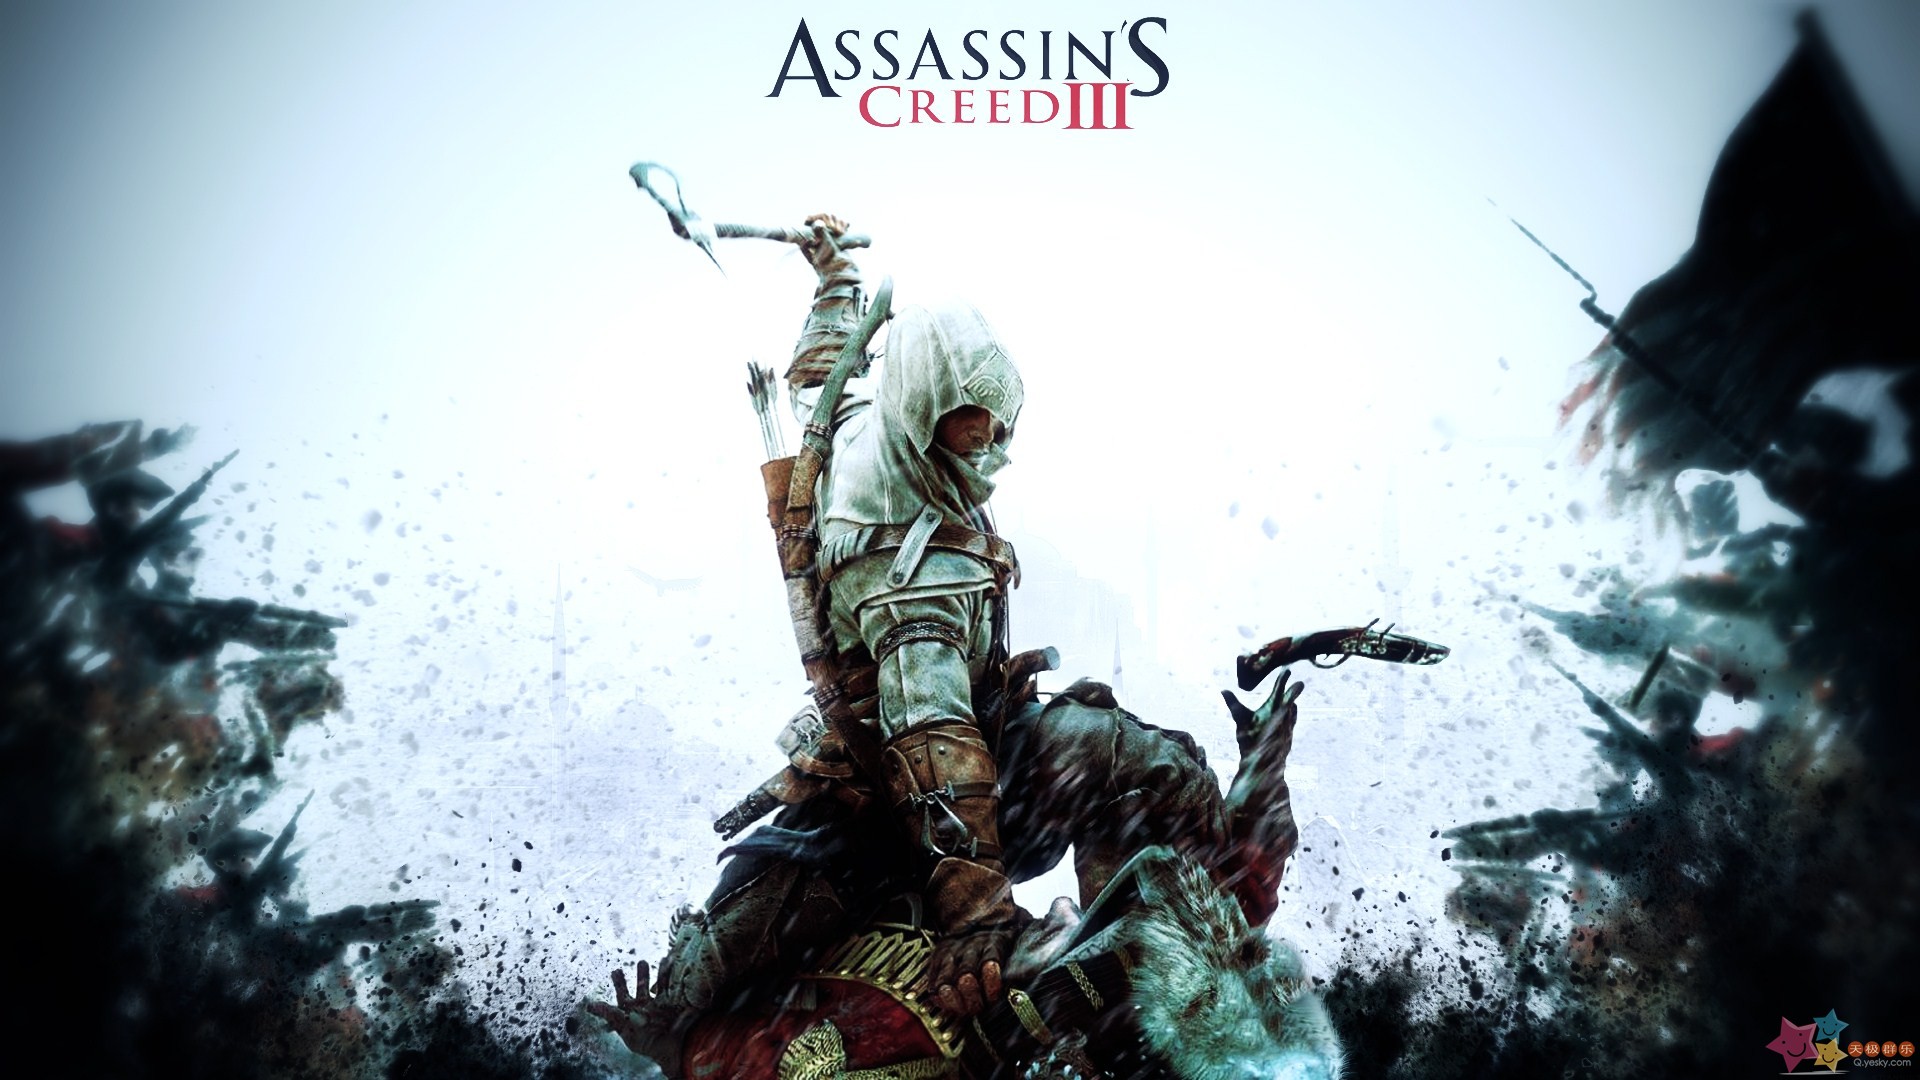 connor (assassin's creed), assassin's creed, video game, assassin's creed iii